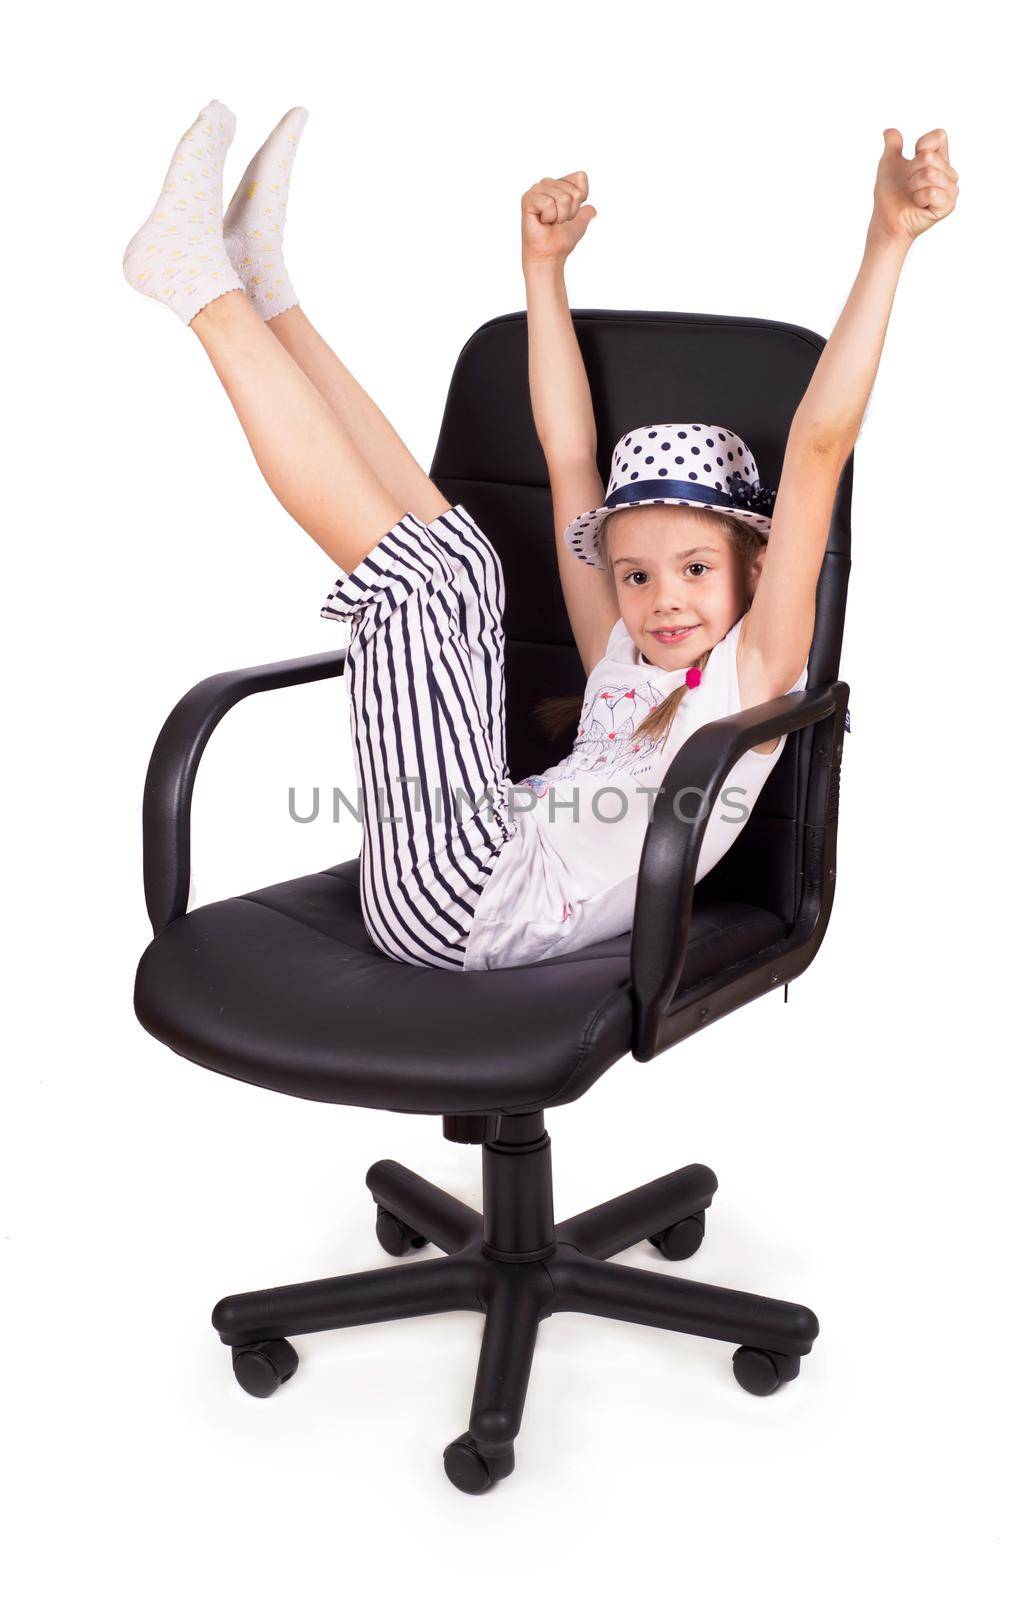 Office chair office chair office chair and little cheerful girl lifted her legs up isolated on white background. Modern adjustable chair from black leather. by aprilphoto